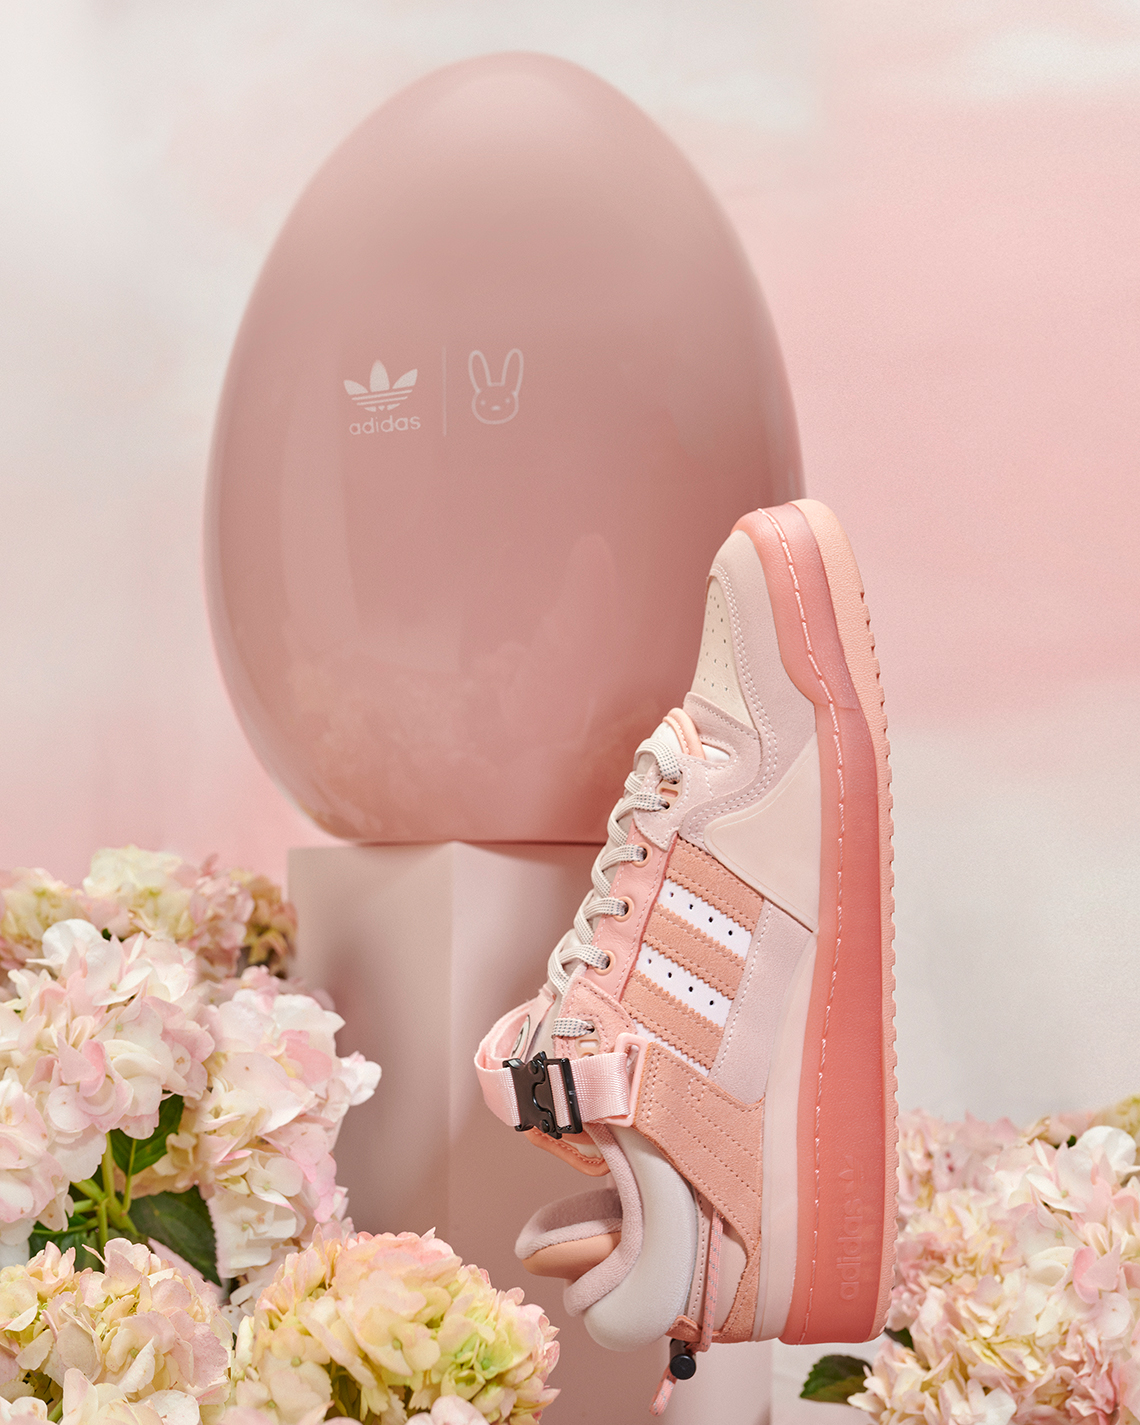 Bad Bunny Adidas boot Pink Shoes Release Date 2